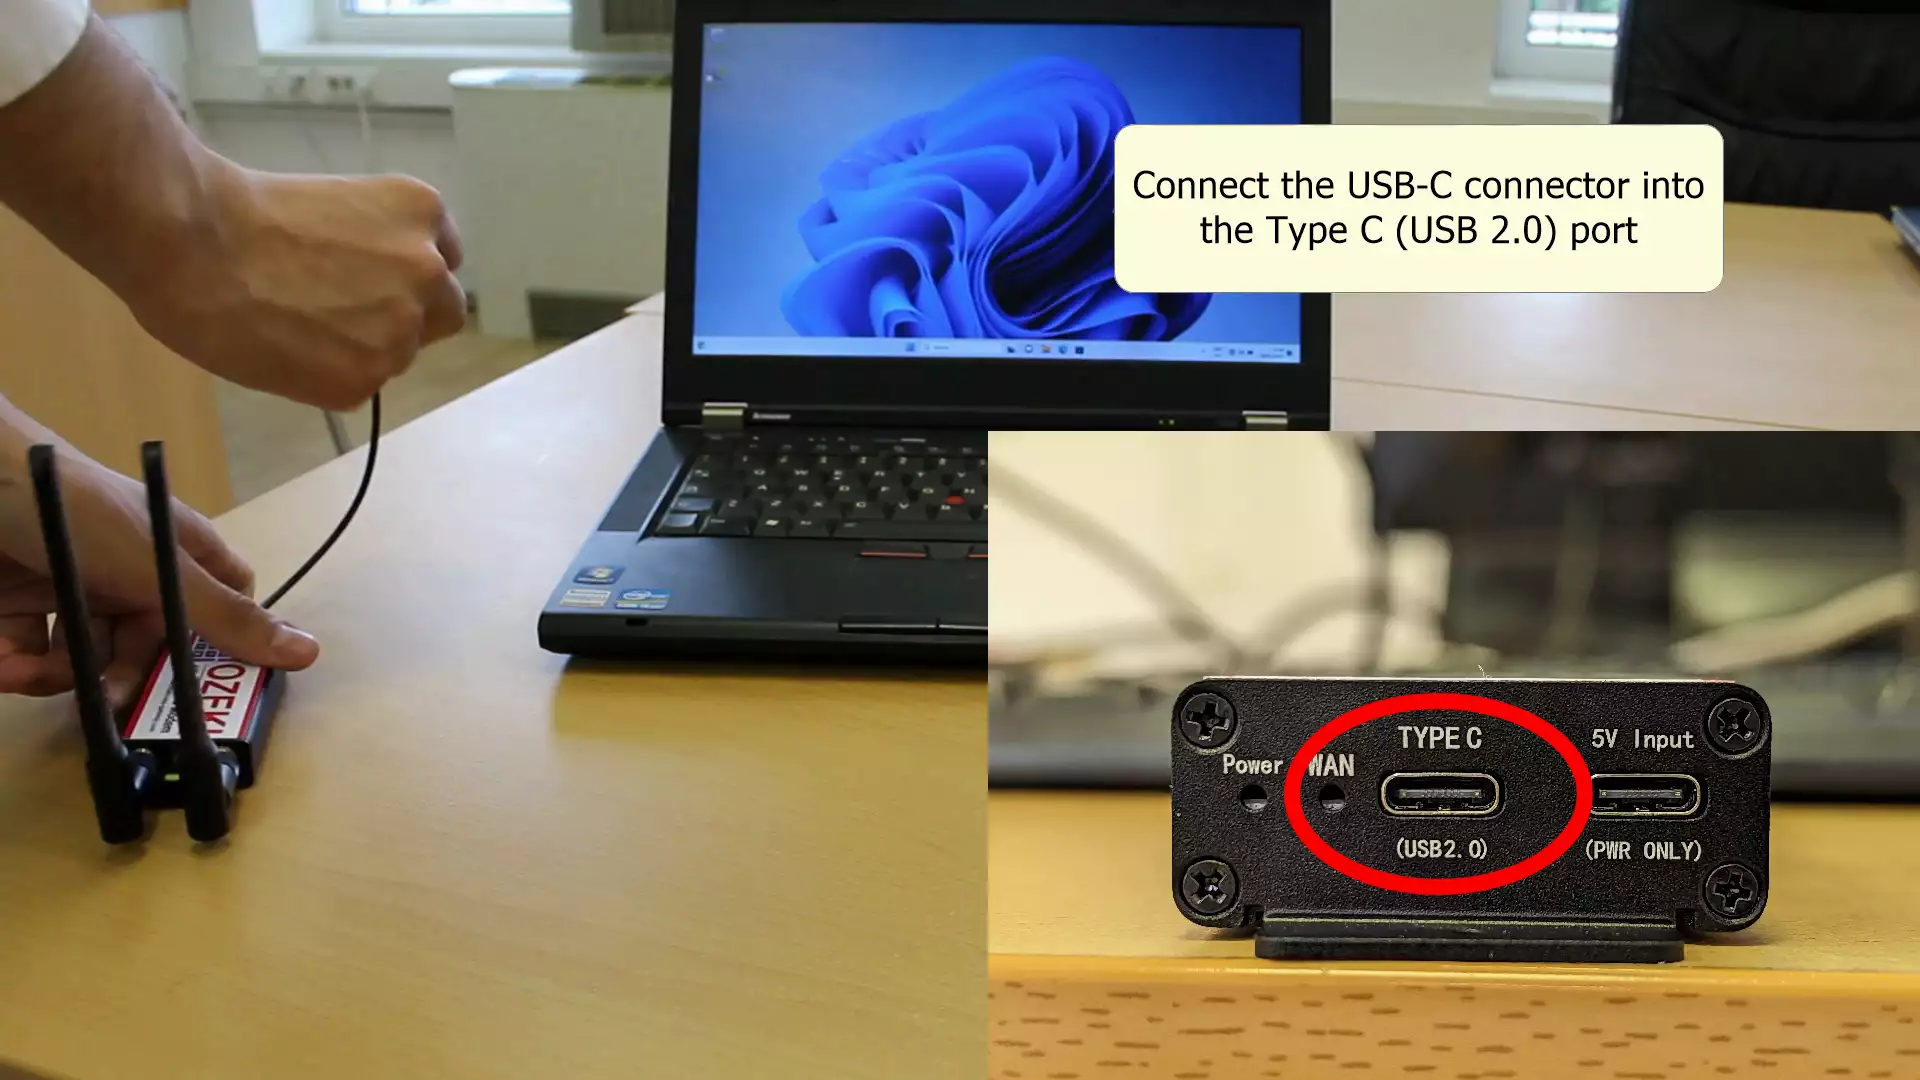 usb type c connector connected to the port labeled type c usb 2 dot 0 on the modem